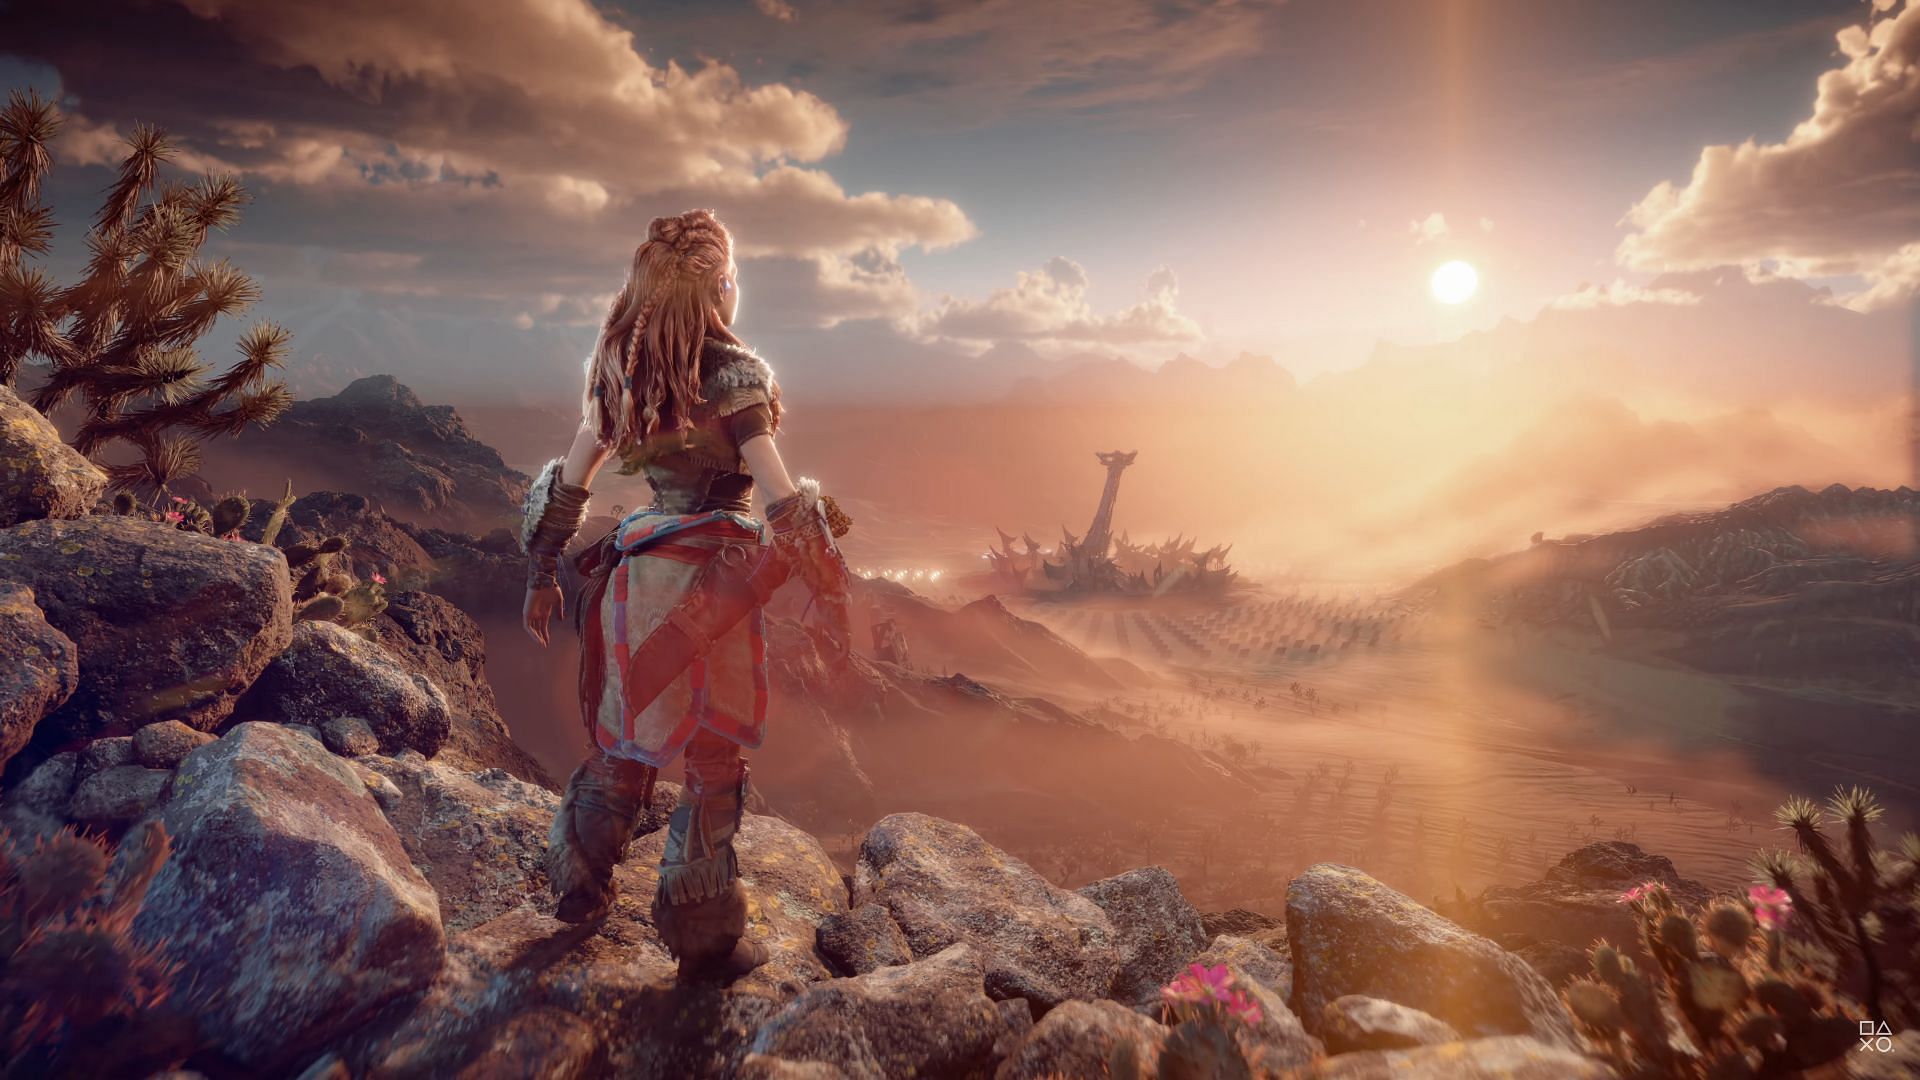 Aloy gazing out at the horizon (Image via YouTube/PlayStation)